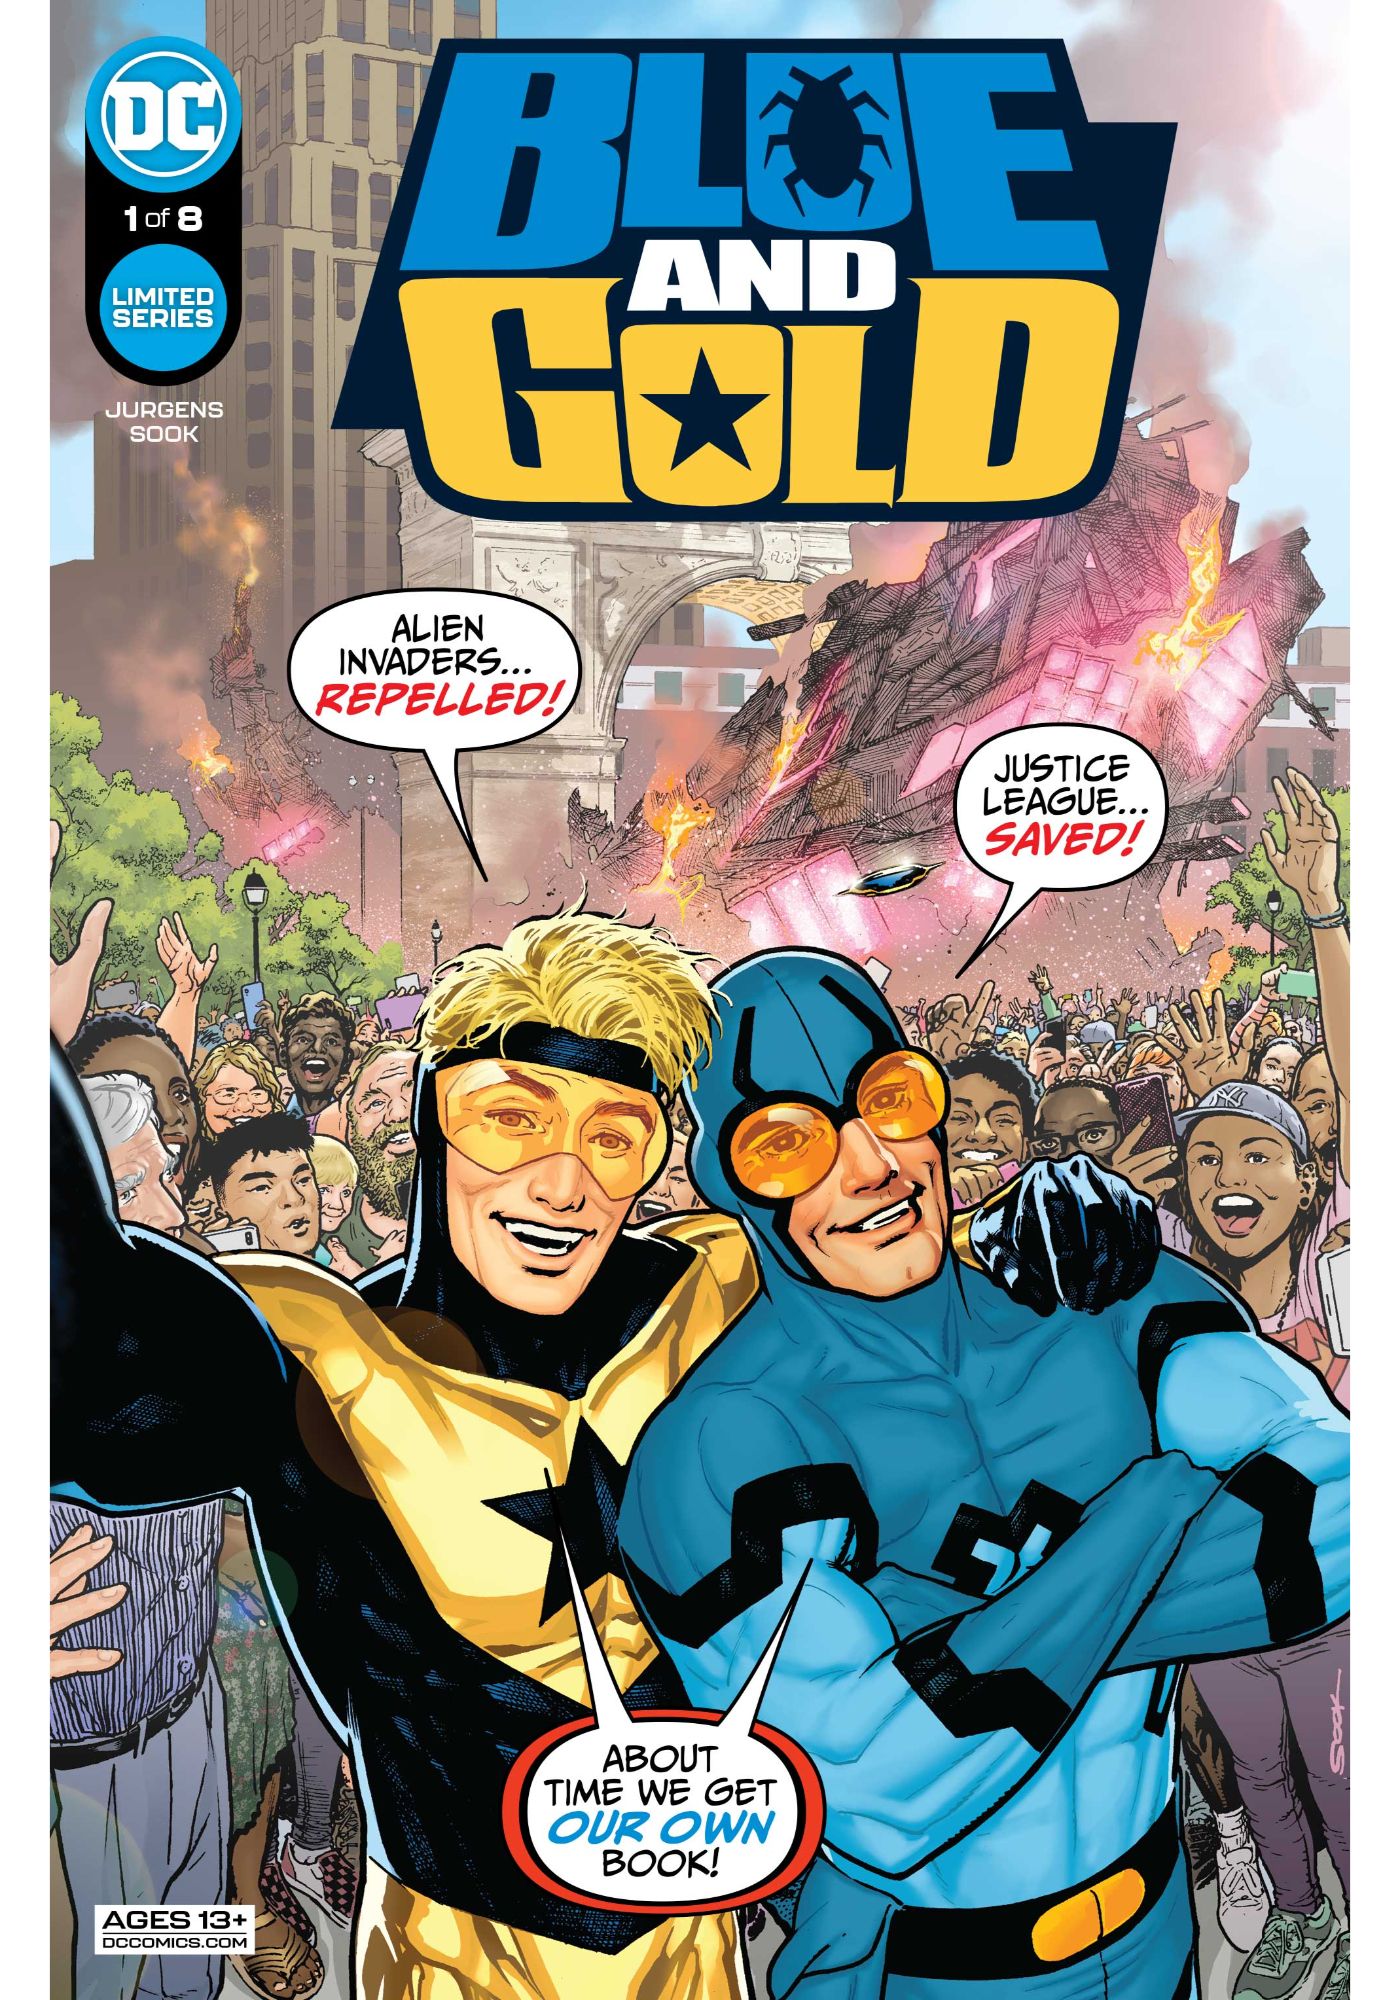 Interview: Dan Jurgens on Booster Gold and Blue Beetle’s Return